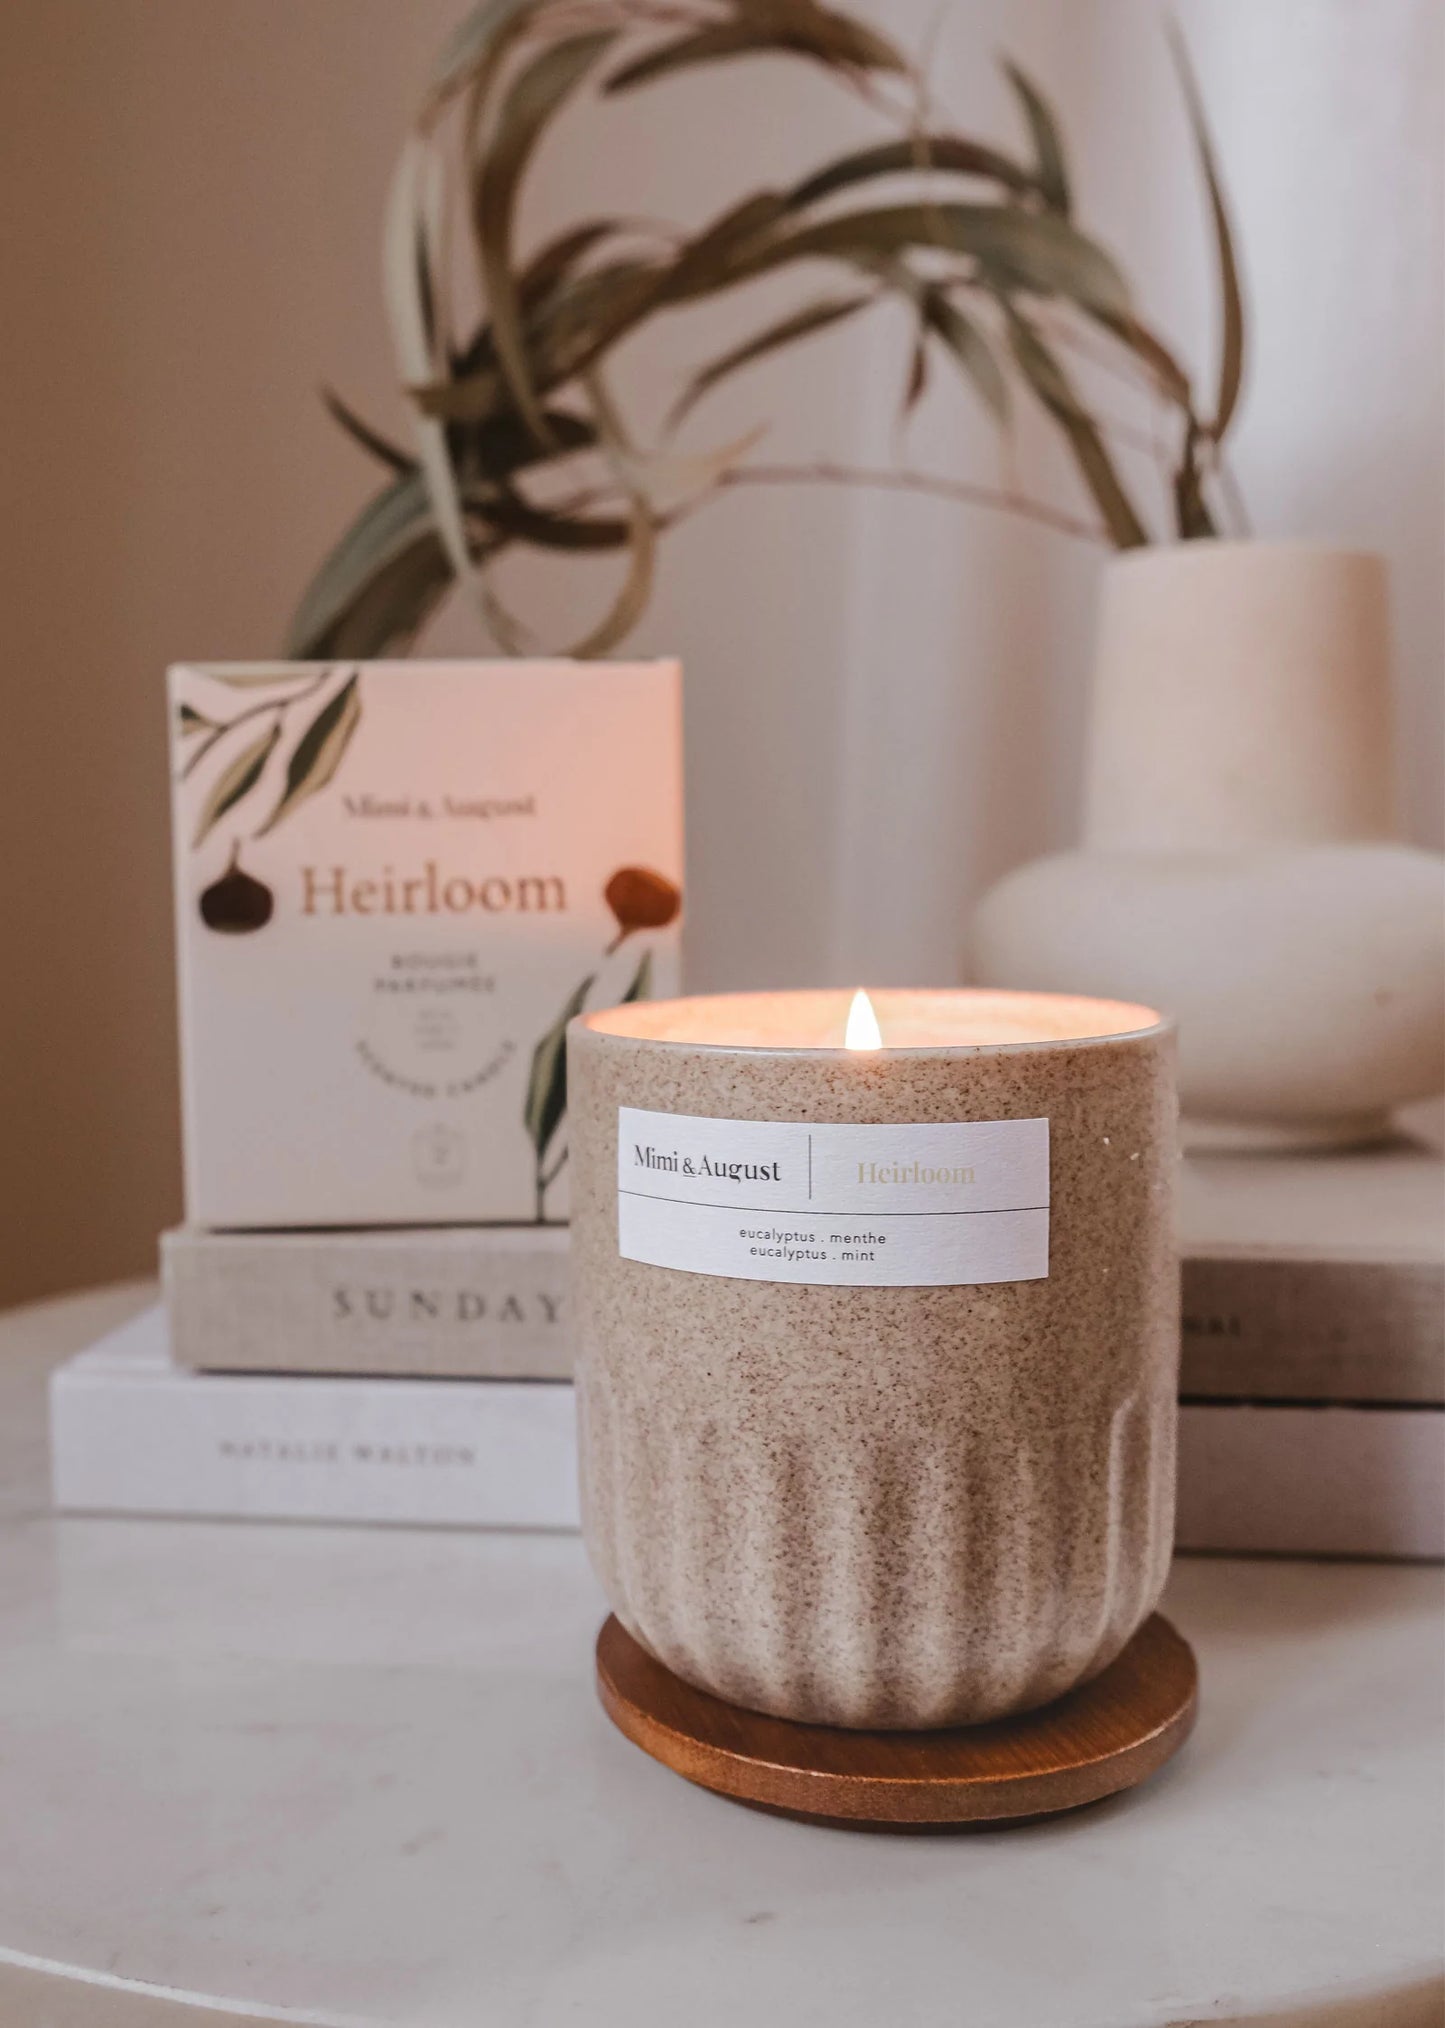 Heirloom reusable candle